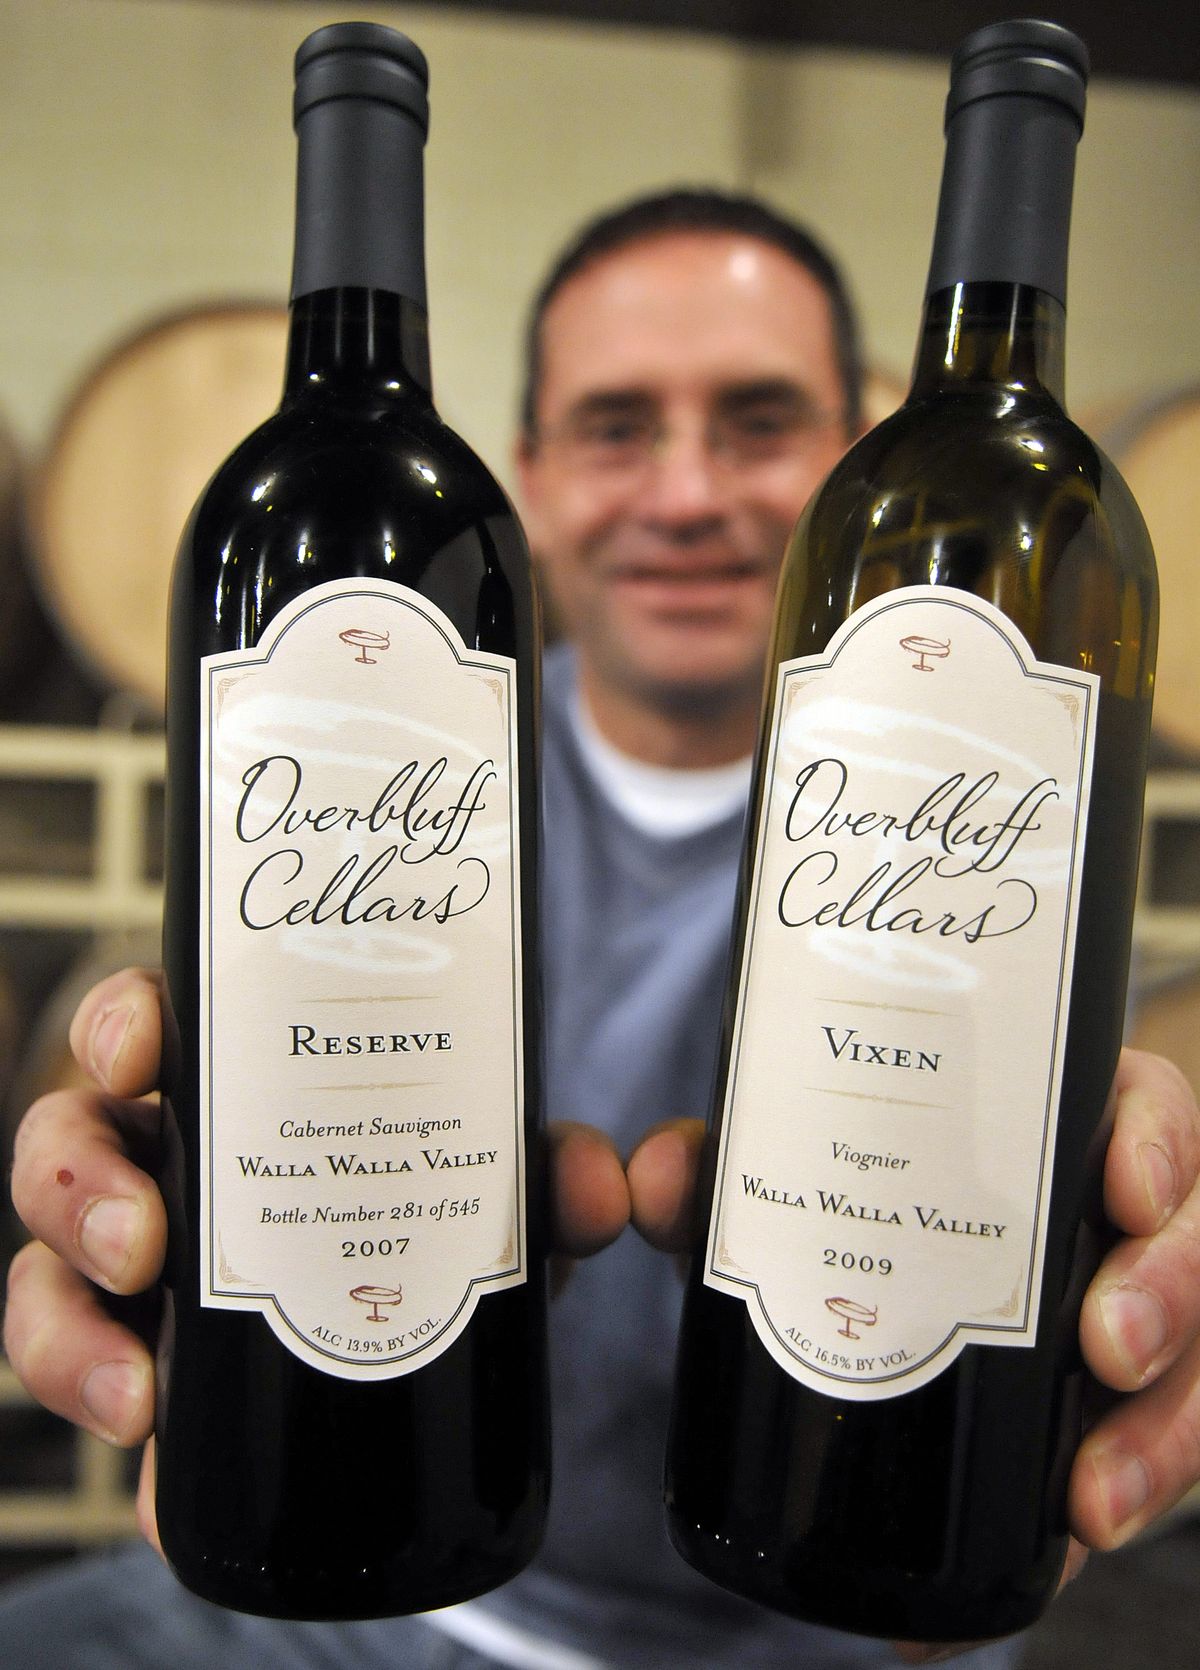 John Caudill, of Overbluff Cellars in Spokane, holds two examples of his first release vintages. (Christopher Anderson)